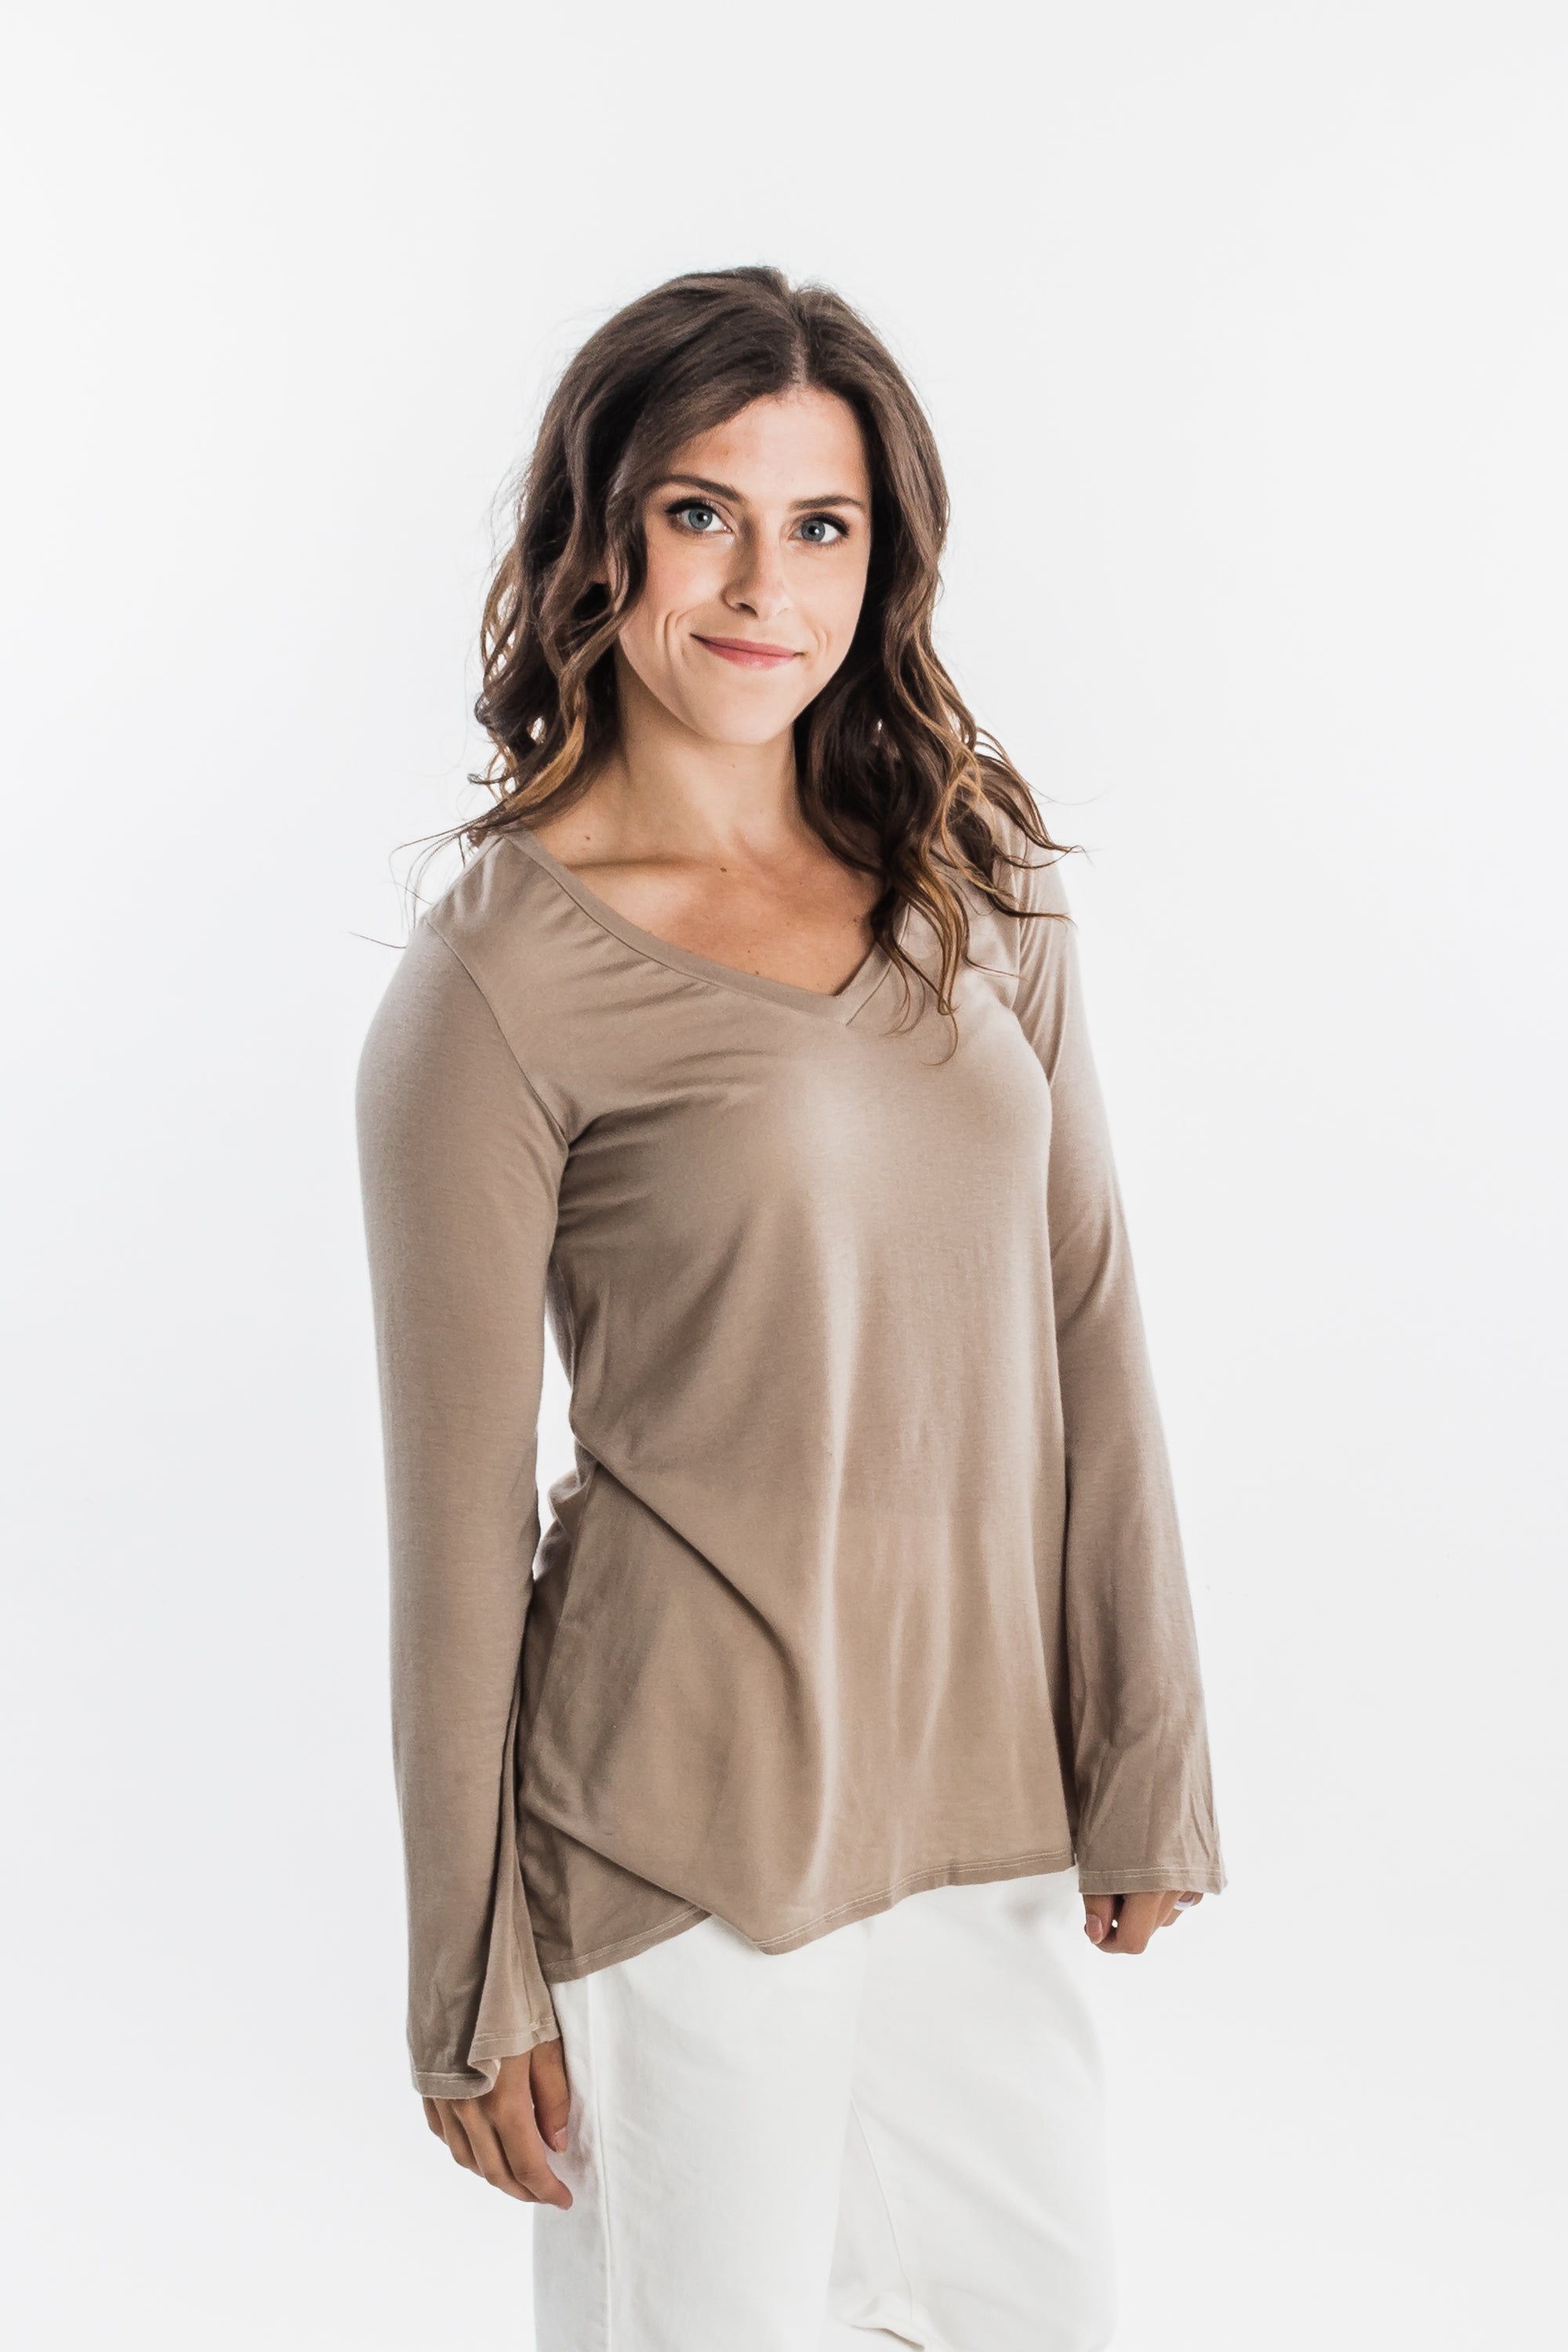 Groceries Apparel Women's Clothing On Sale Up To 90% Off Retail